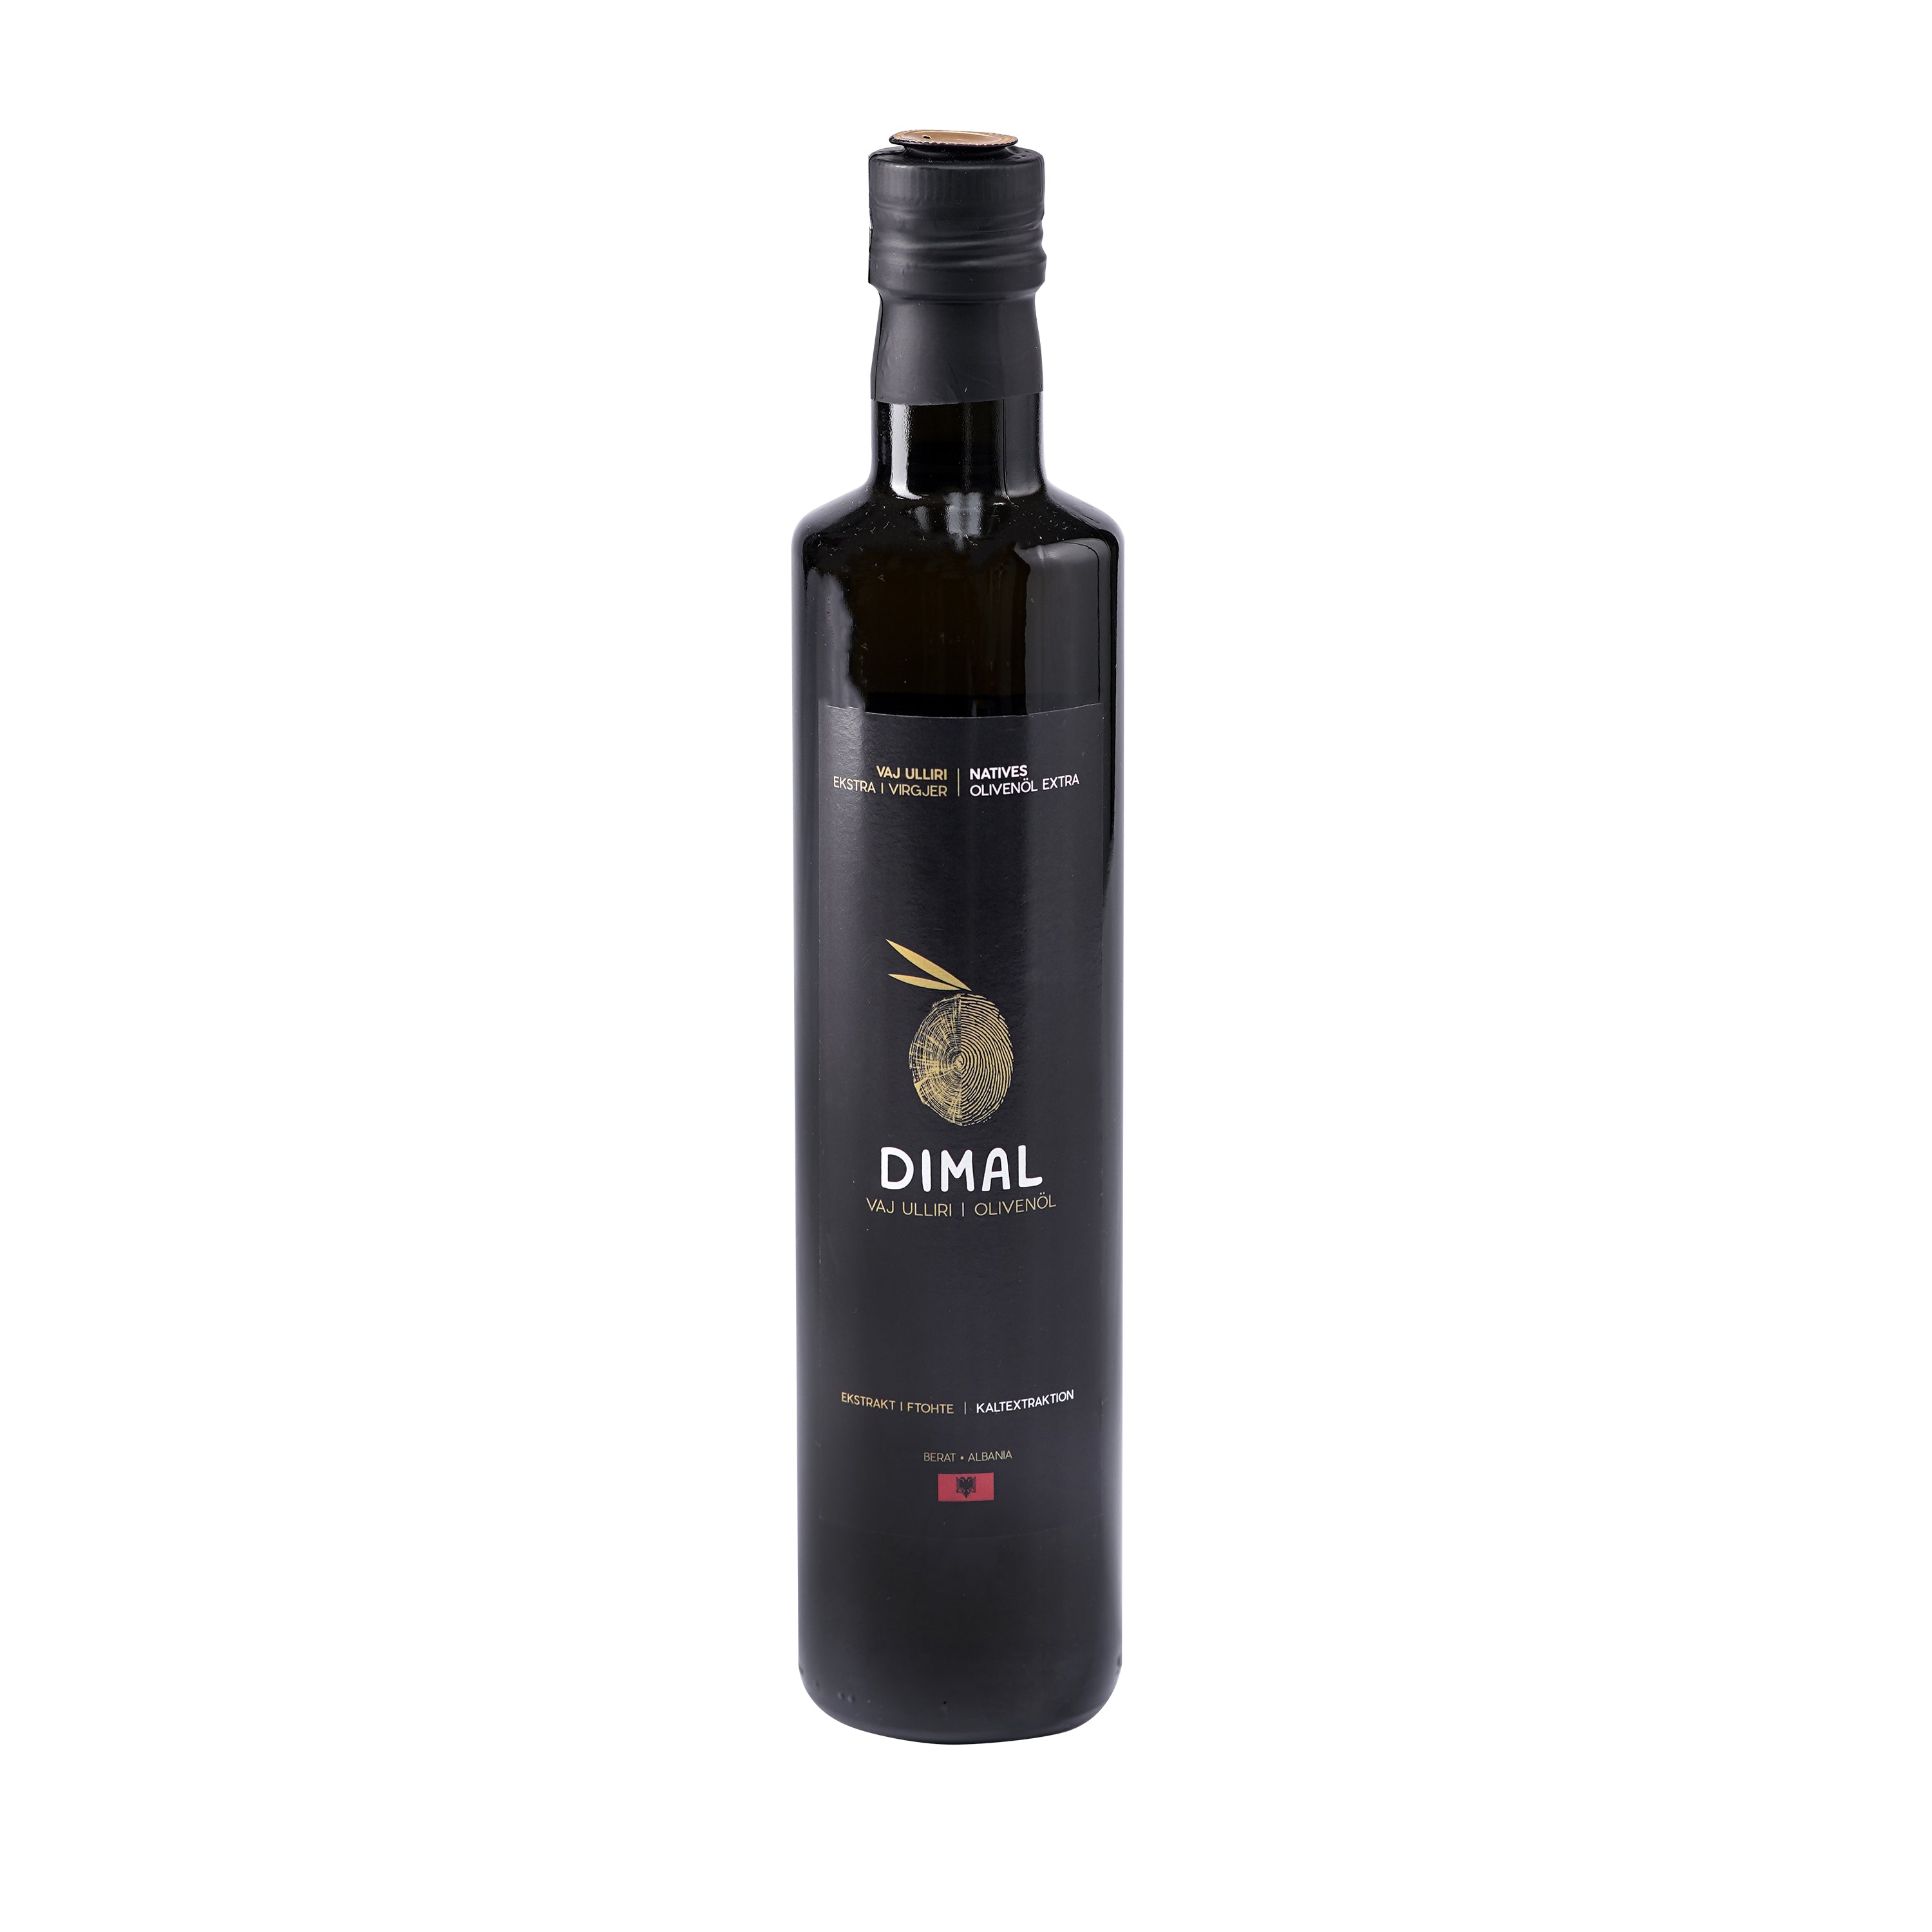 Dimal Extra Virgin Olive Oil from Albania - 500ml